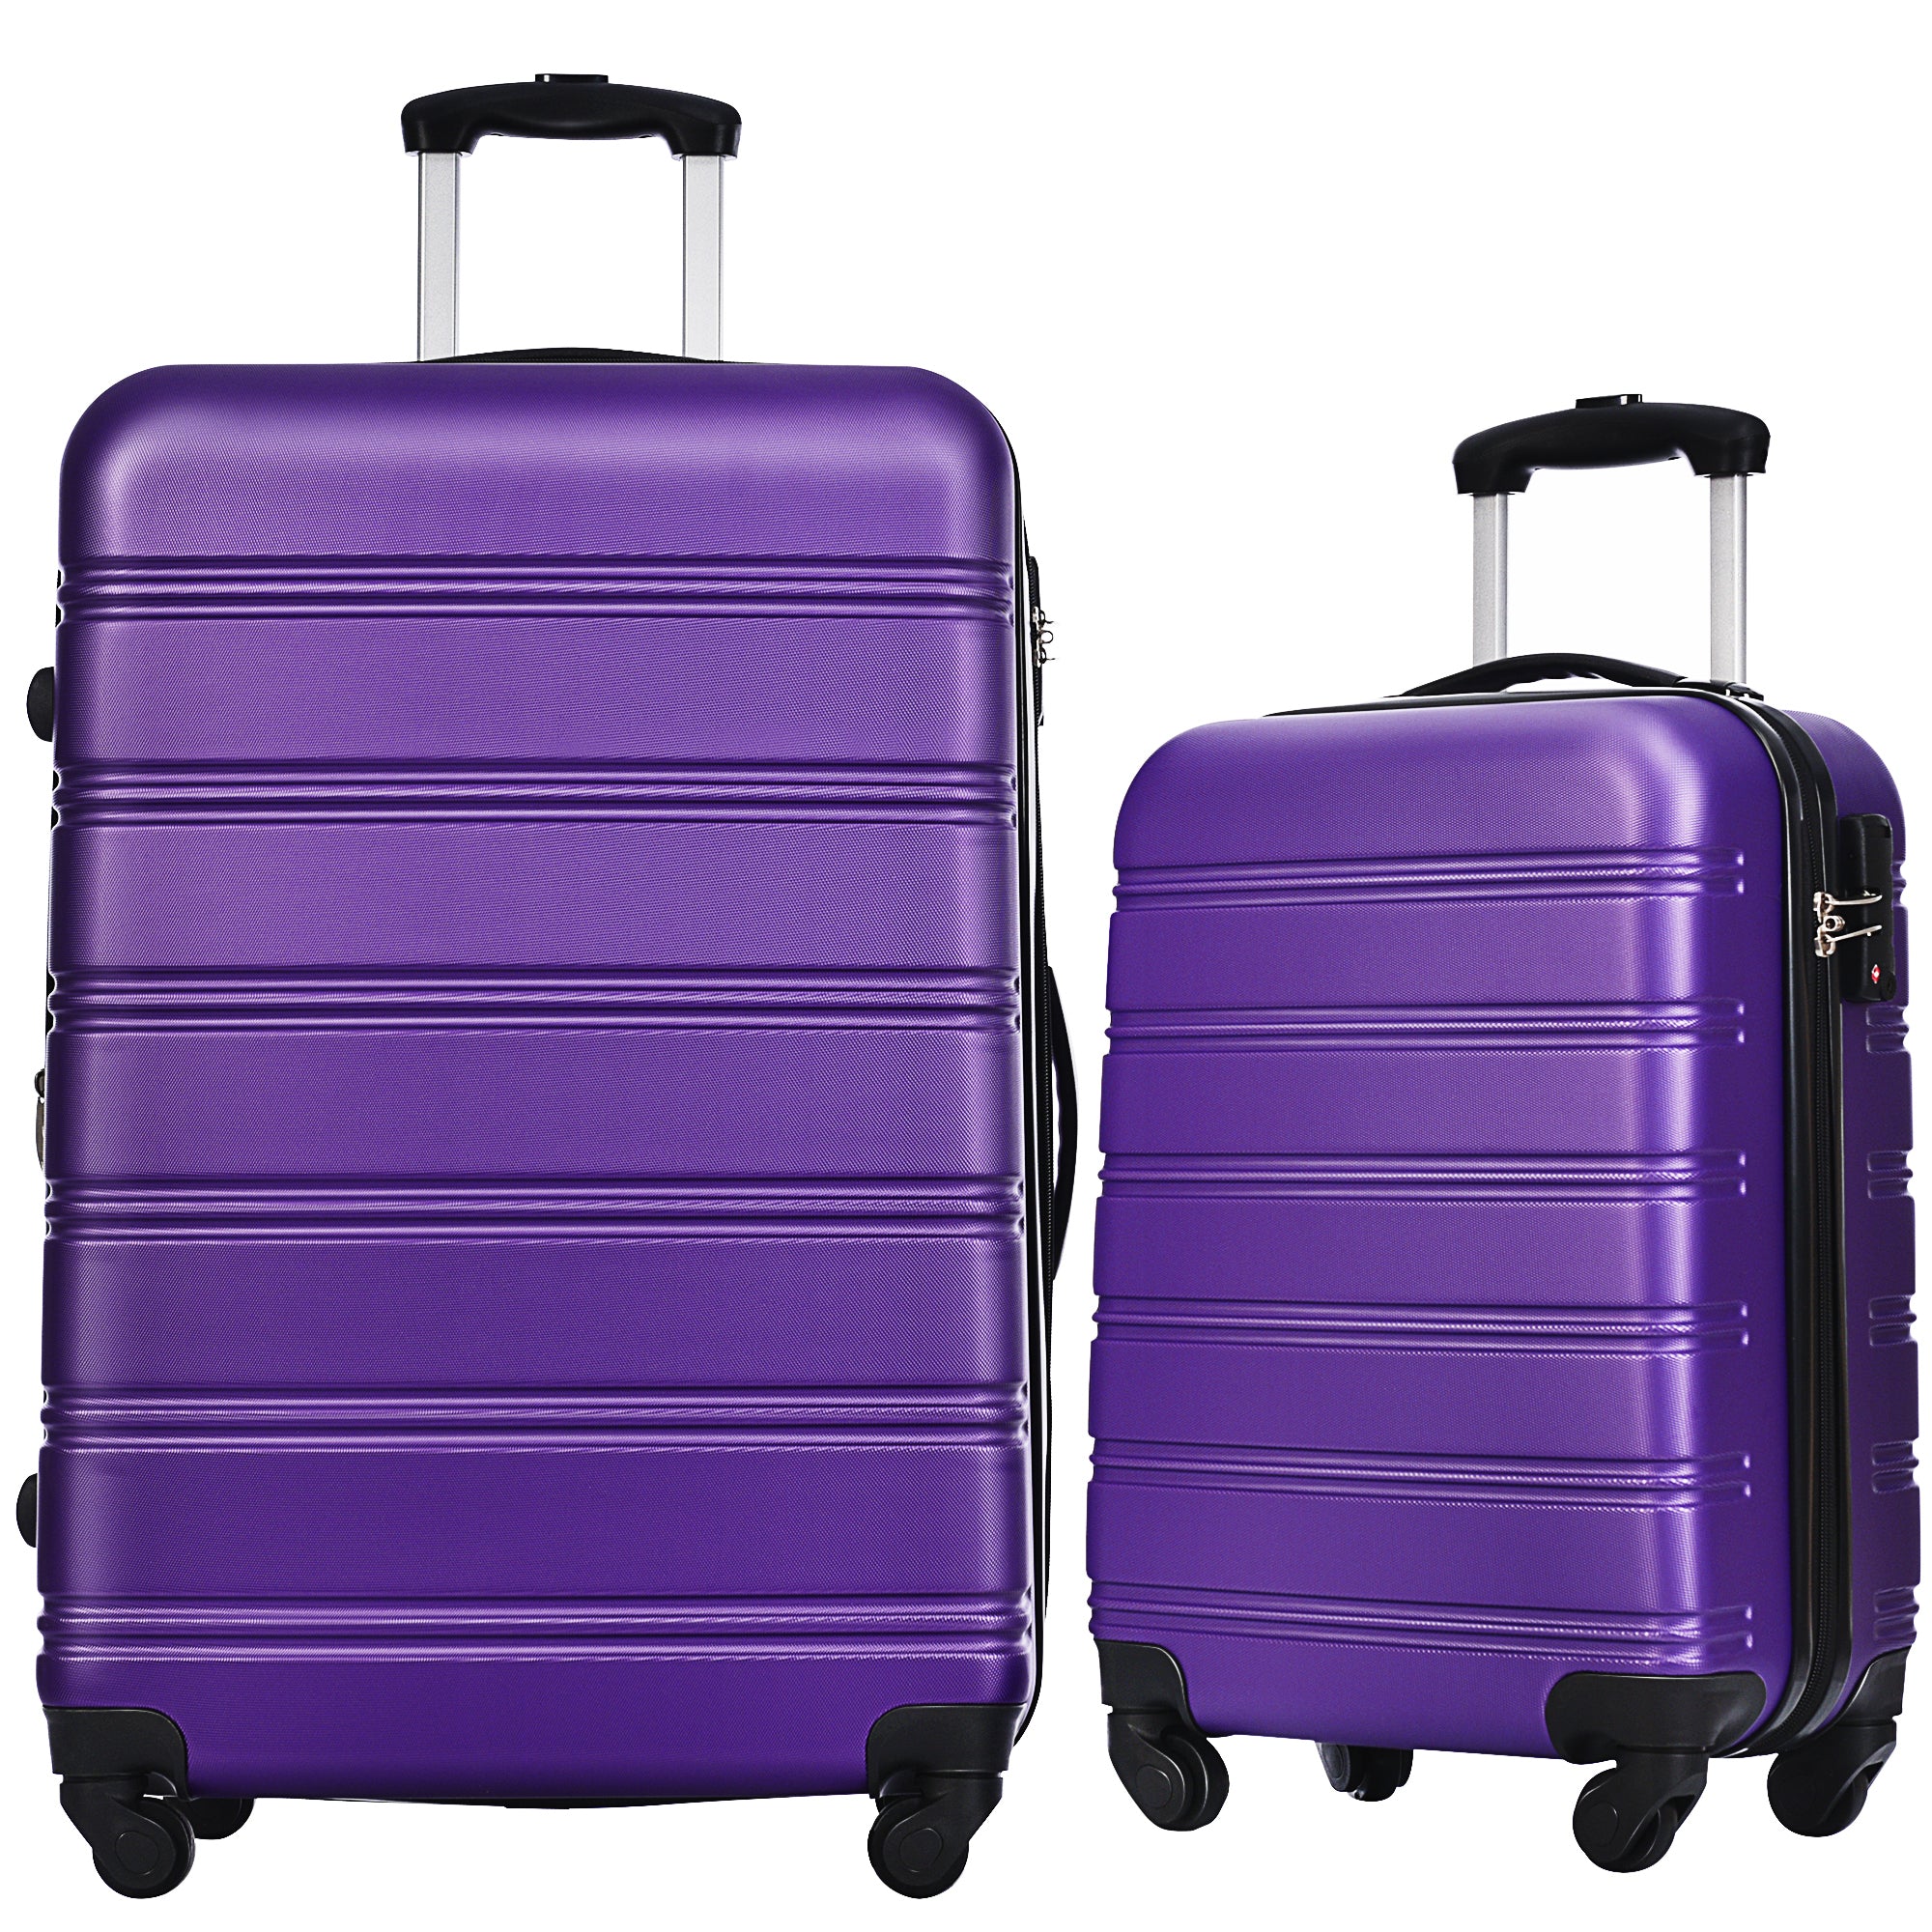 Luggage-Sets-of-2-Piece-Carry-on-Suitcase-Airline-Approved,Hard-Case-Expandable-Spinner-Wheels-Travel